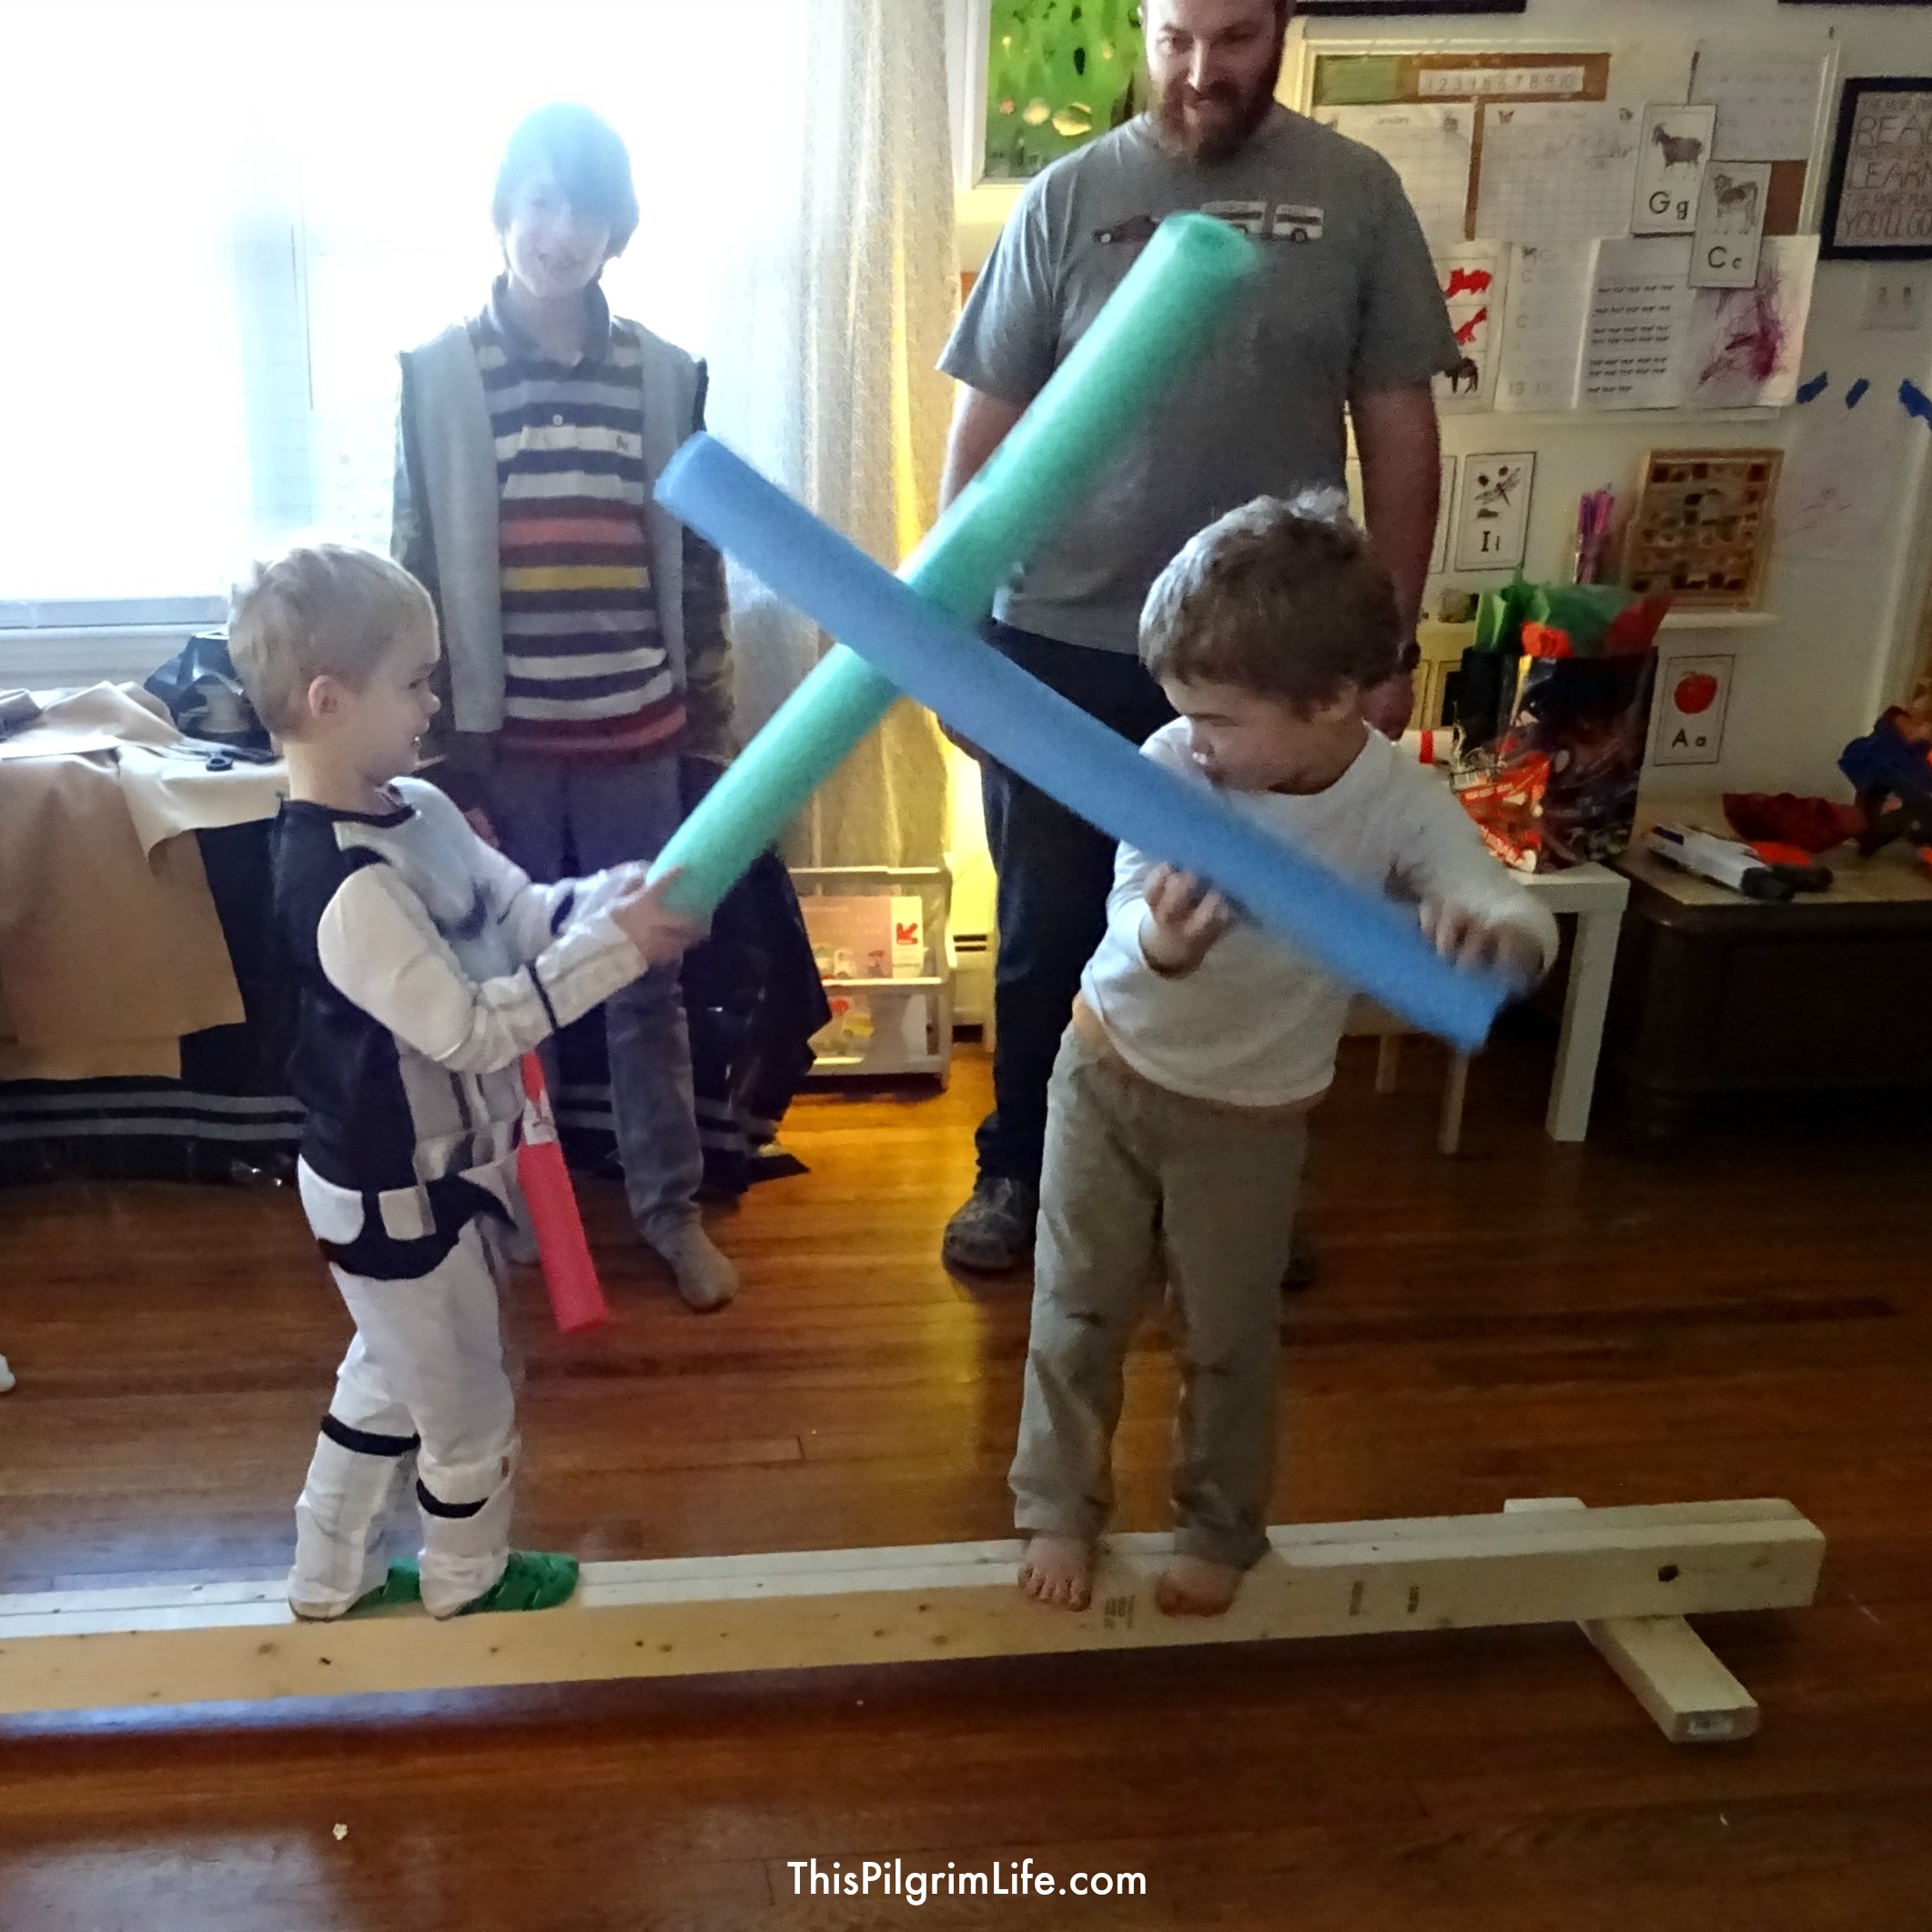 This weekend we celebrated my son's fourth birthday with a Star Wars Jedi Training party. He and several of his friends practiced their light saber skills, droid building skills, and more during the simple birthday party.